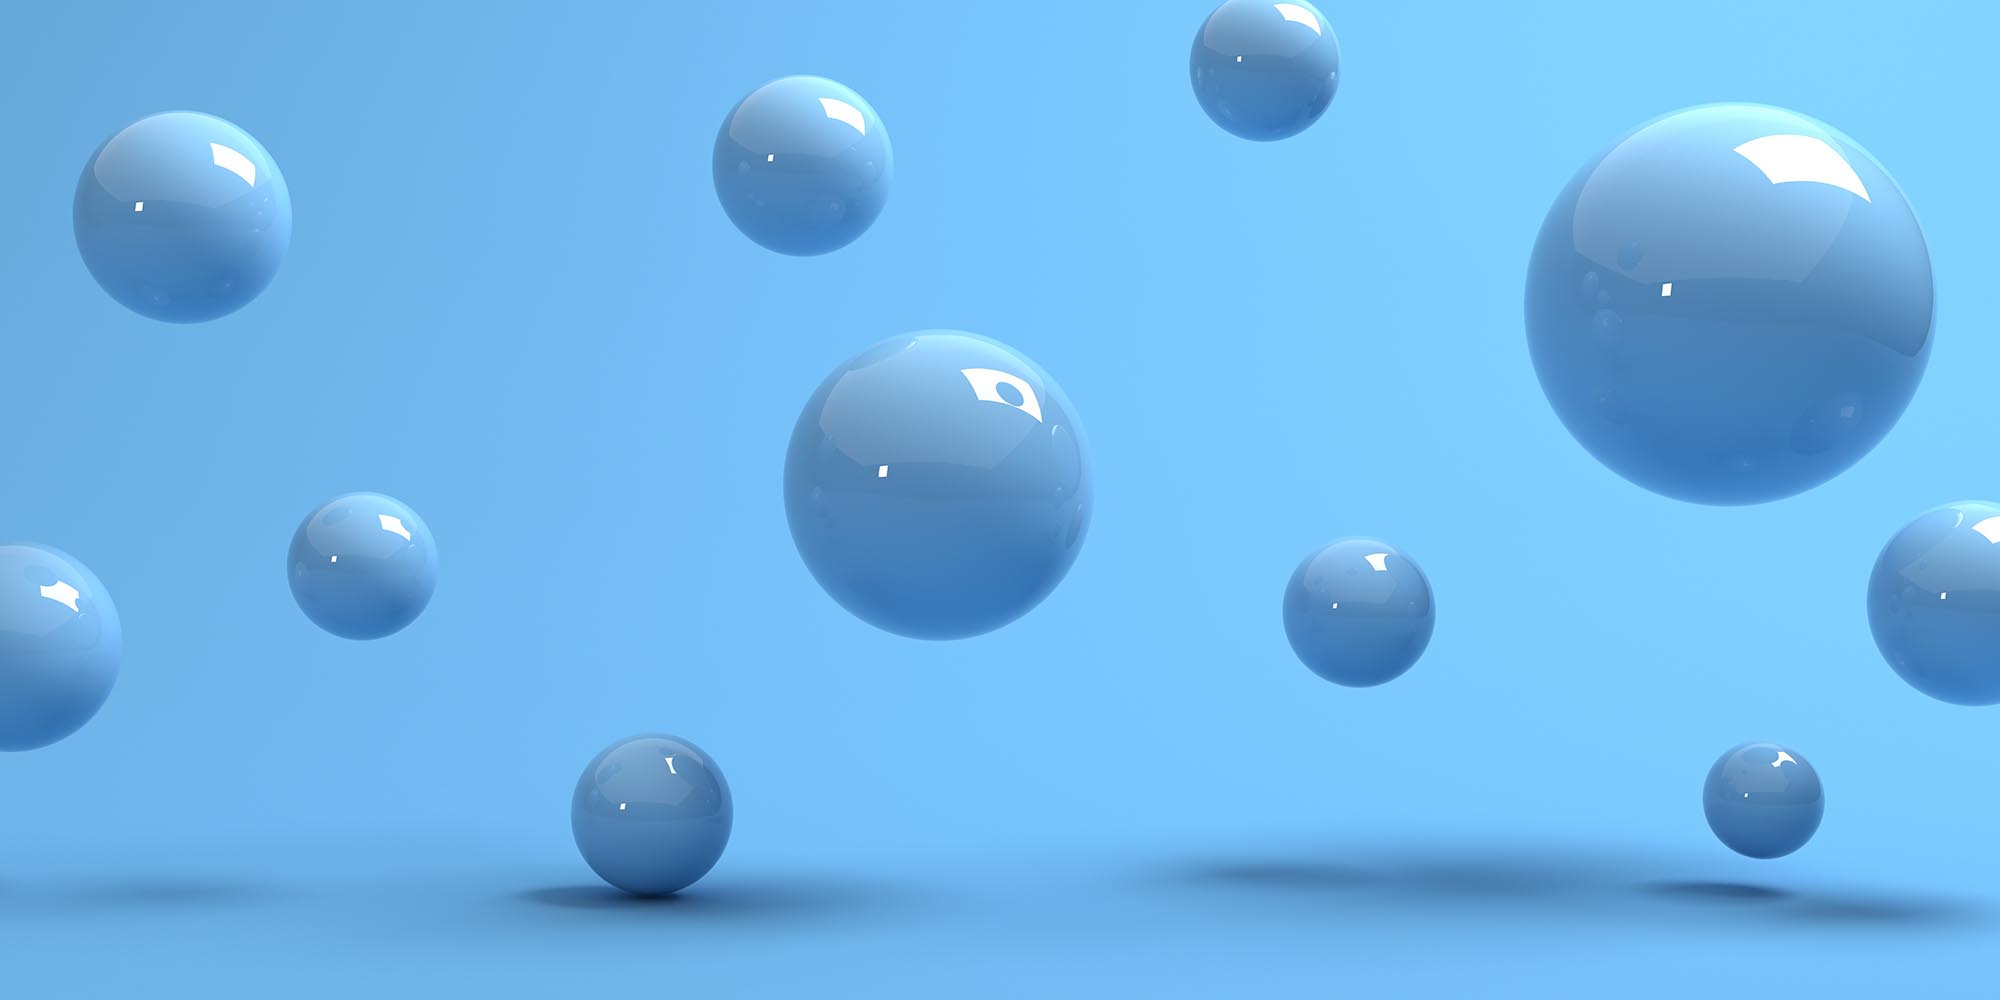 3D render of abstract blue floating spheres